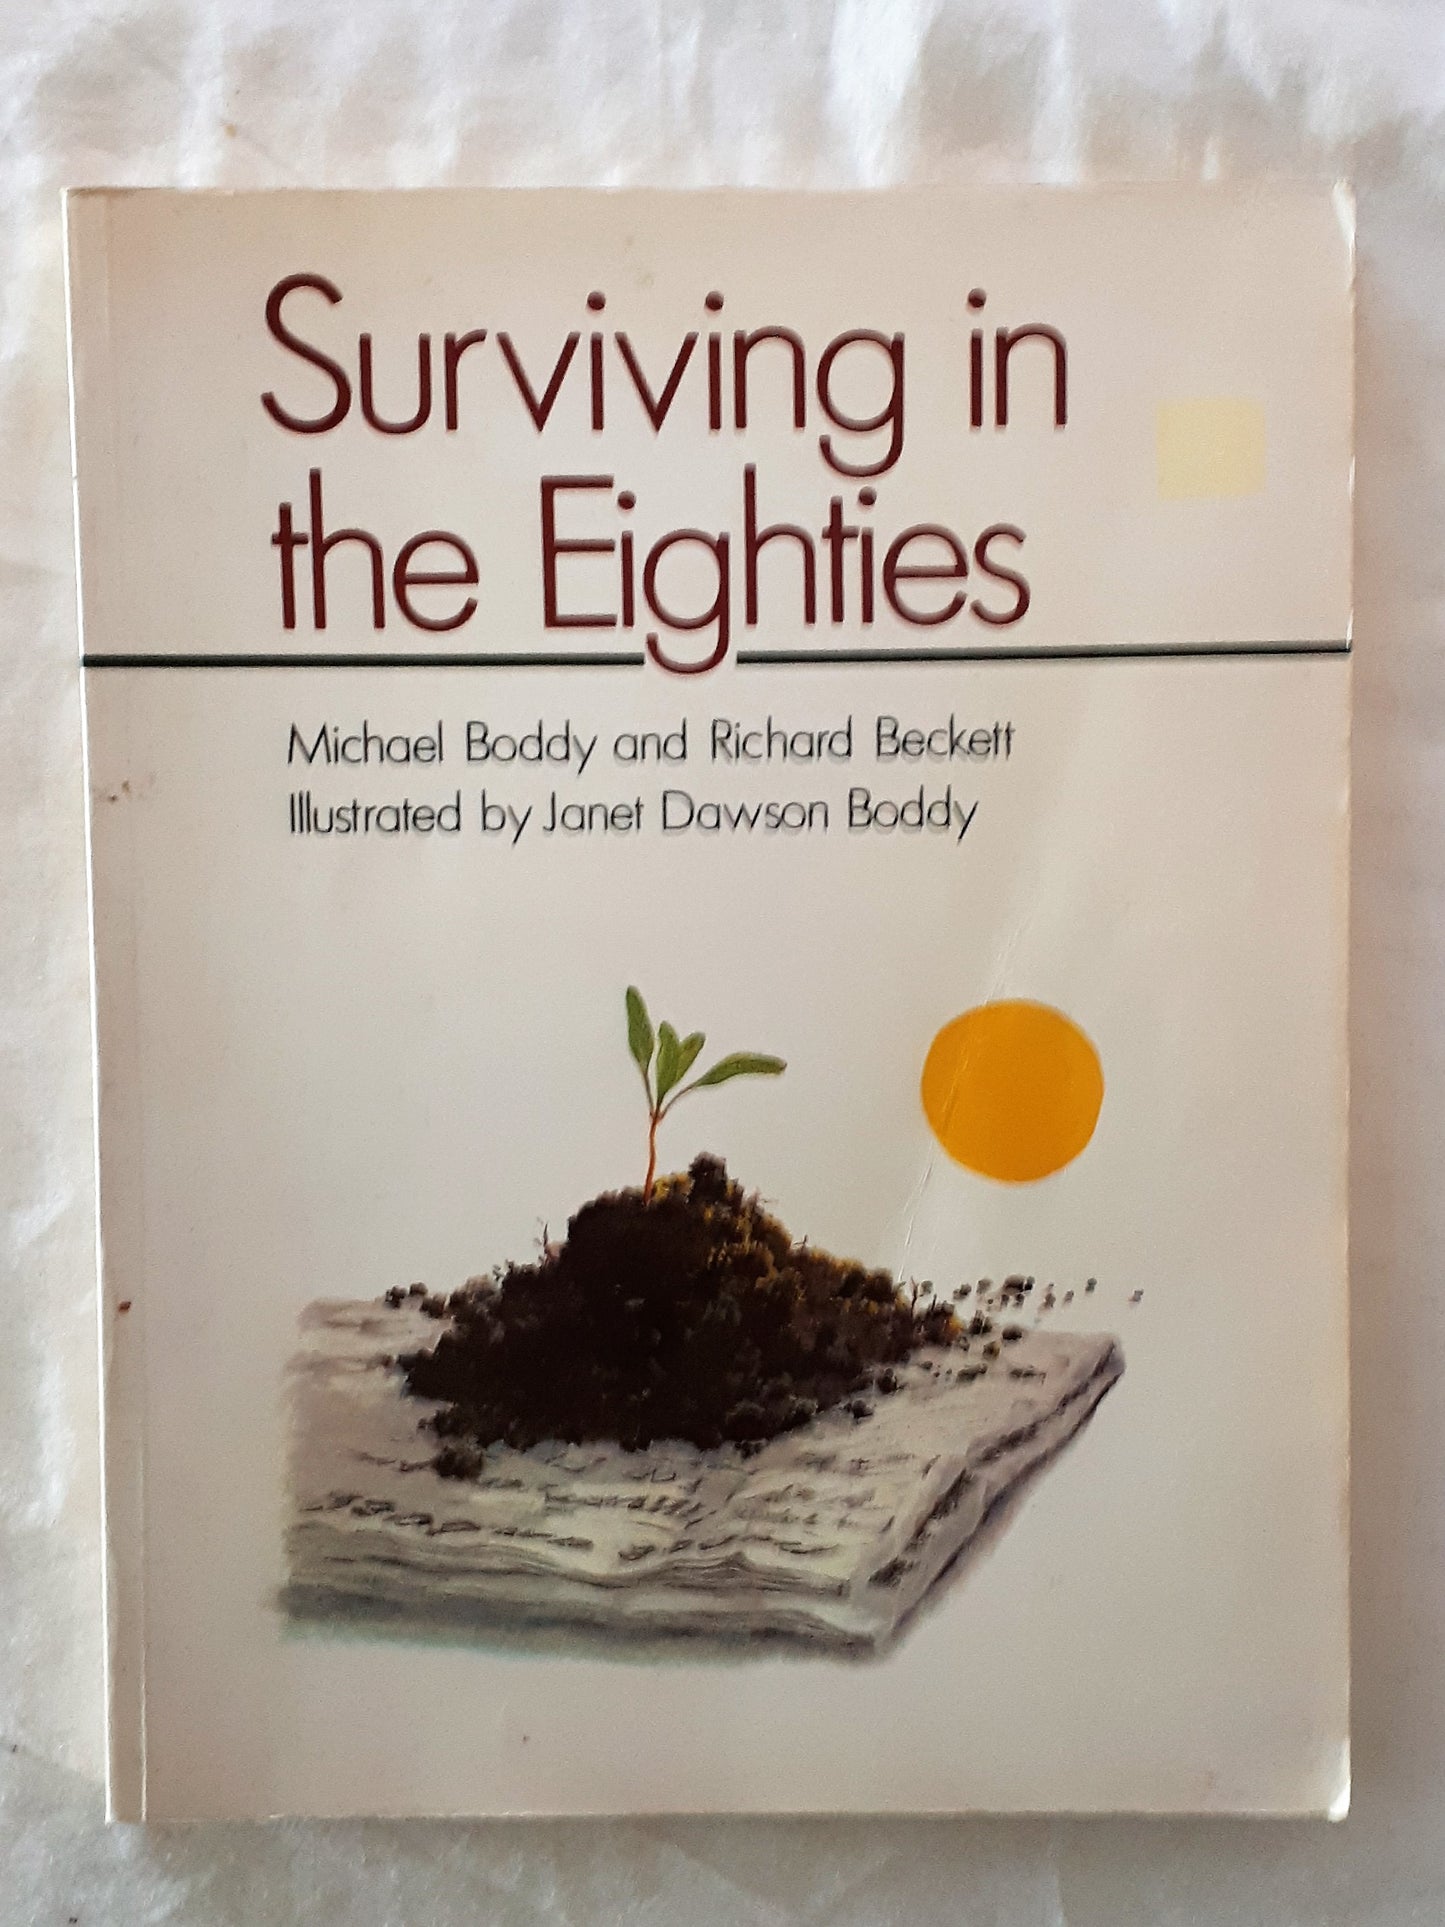 Surviving in the Eighties by Michael Boddy and Richard Beckett